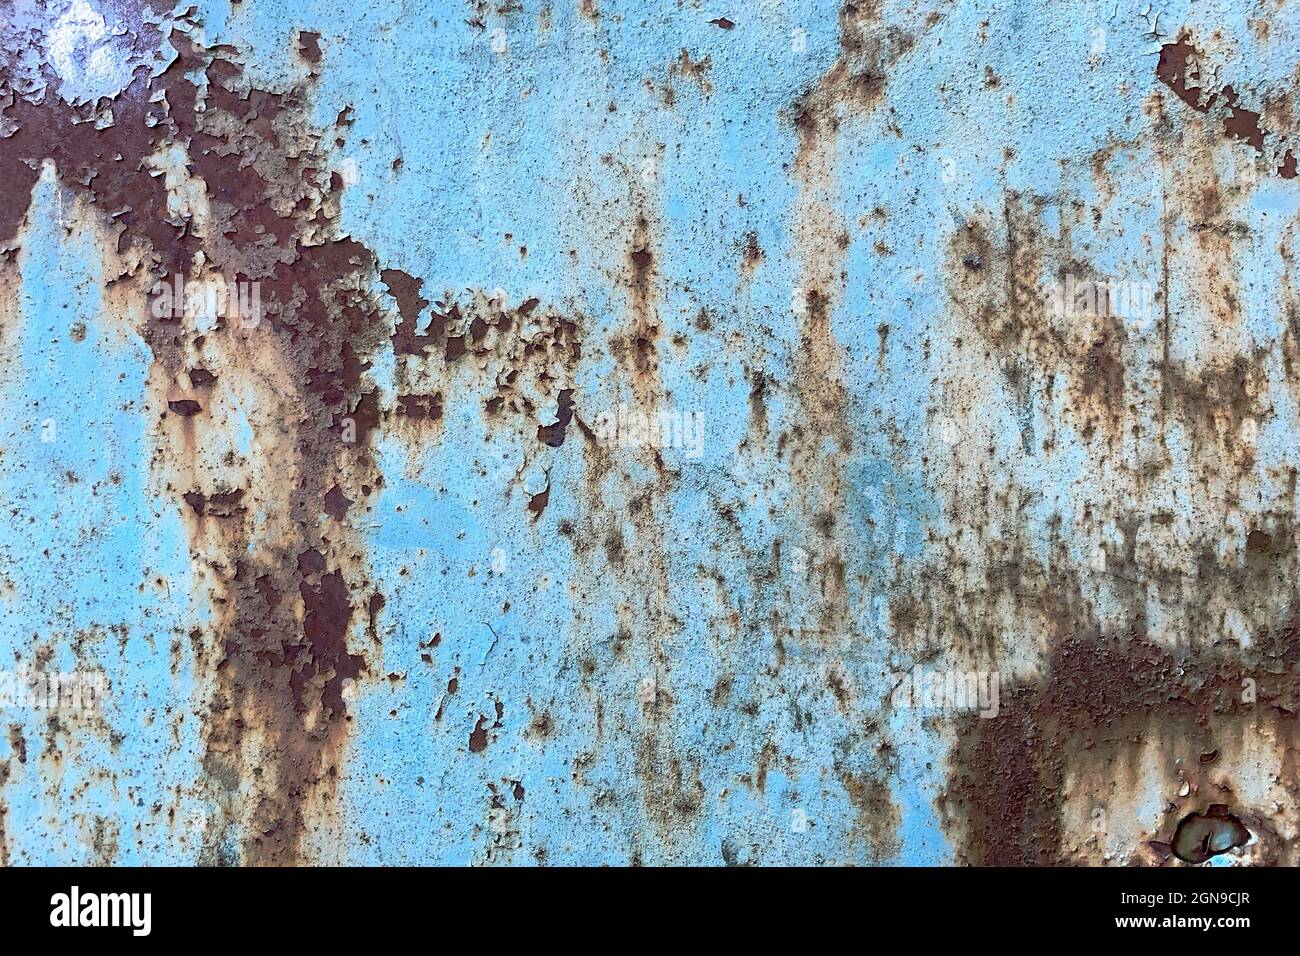 Damaged old peeling paint blue background rusty metal flat pallet. Cracked oil paint on aged metal surface. Close-up. Outdoors. Stock Photo